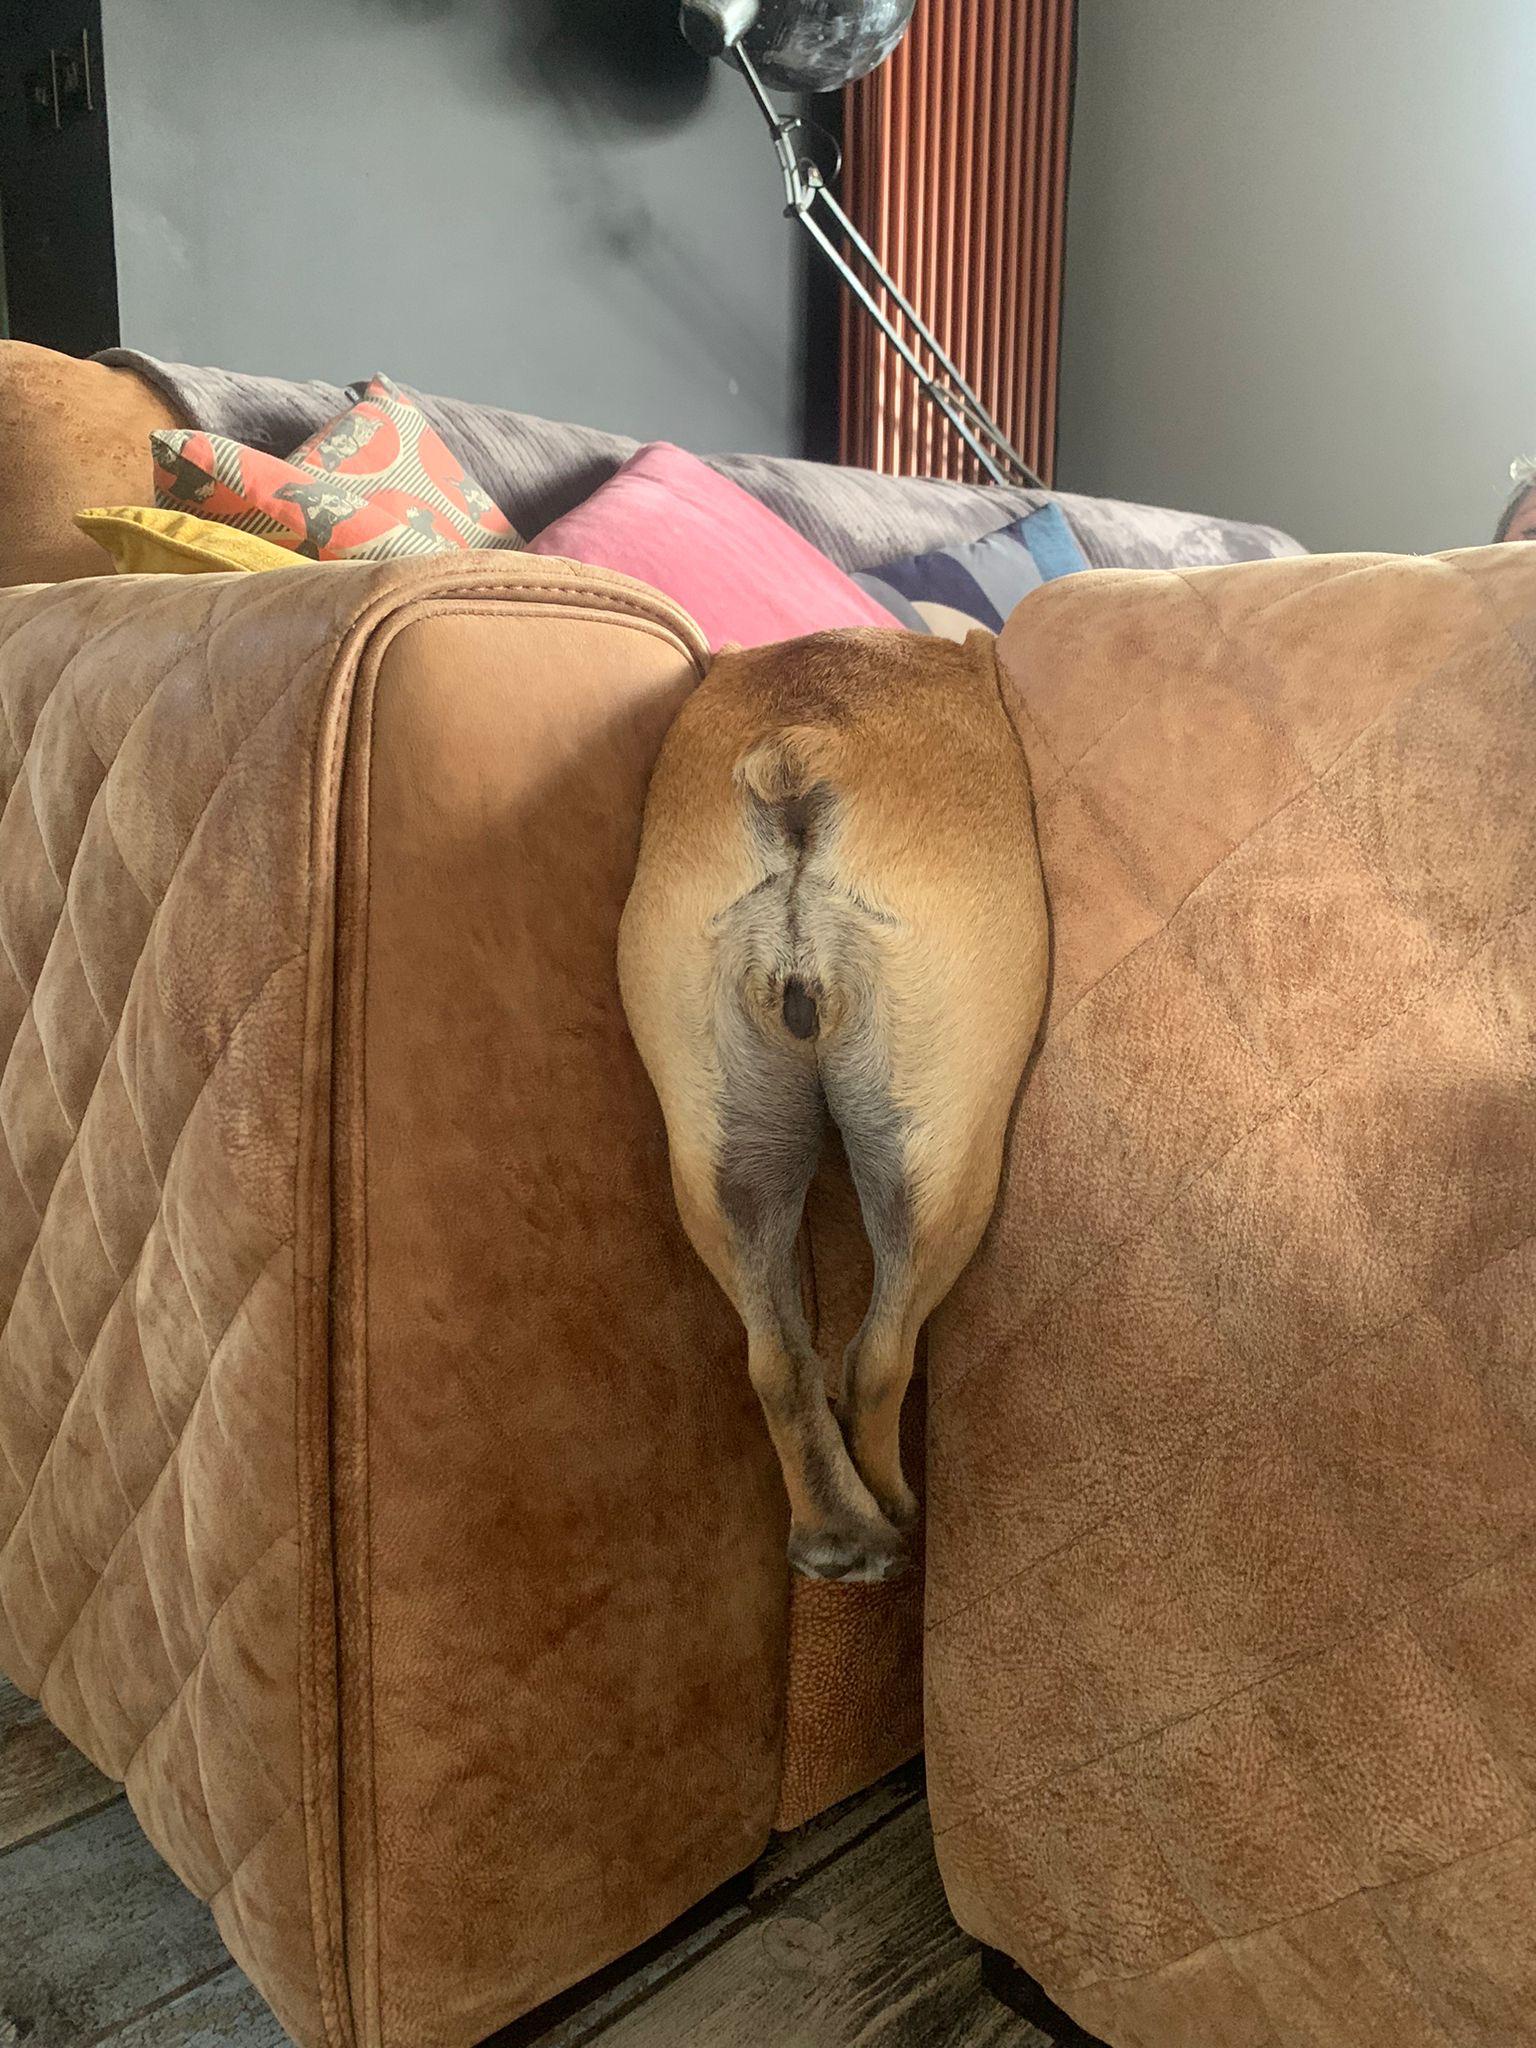 dog stuck in couch so only her rear end is showing